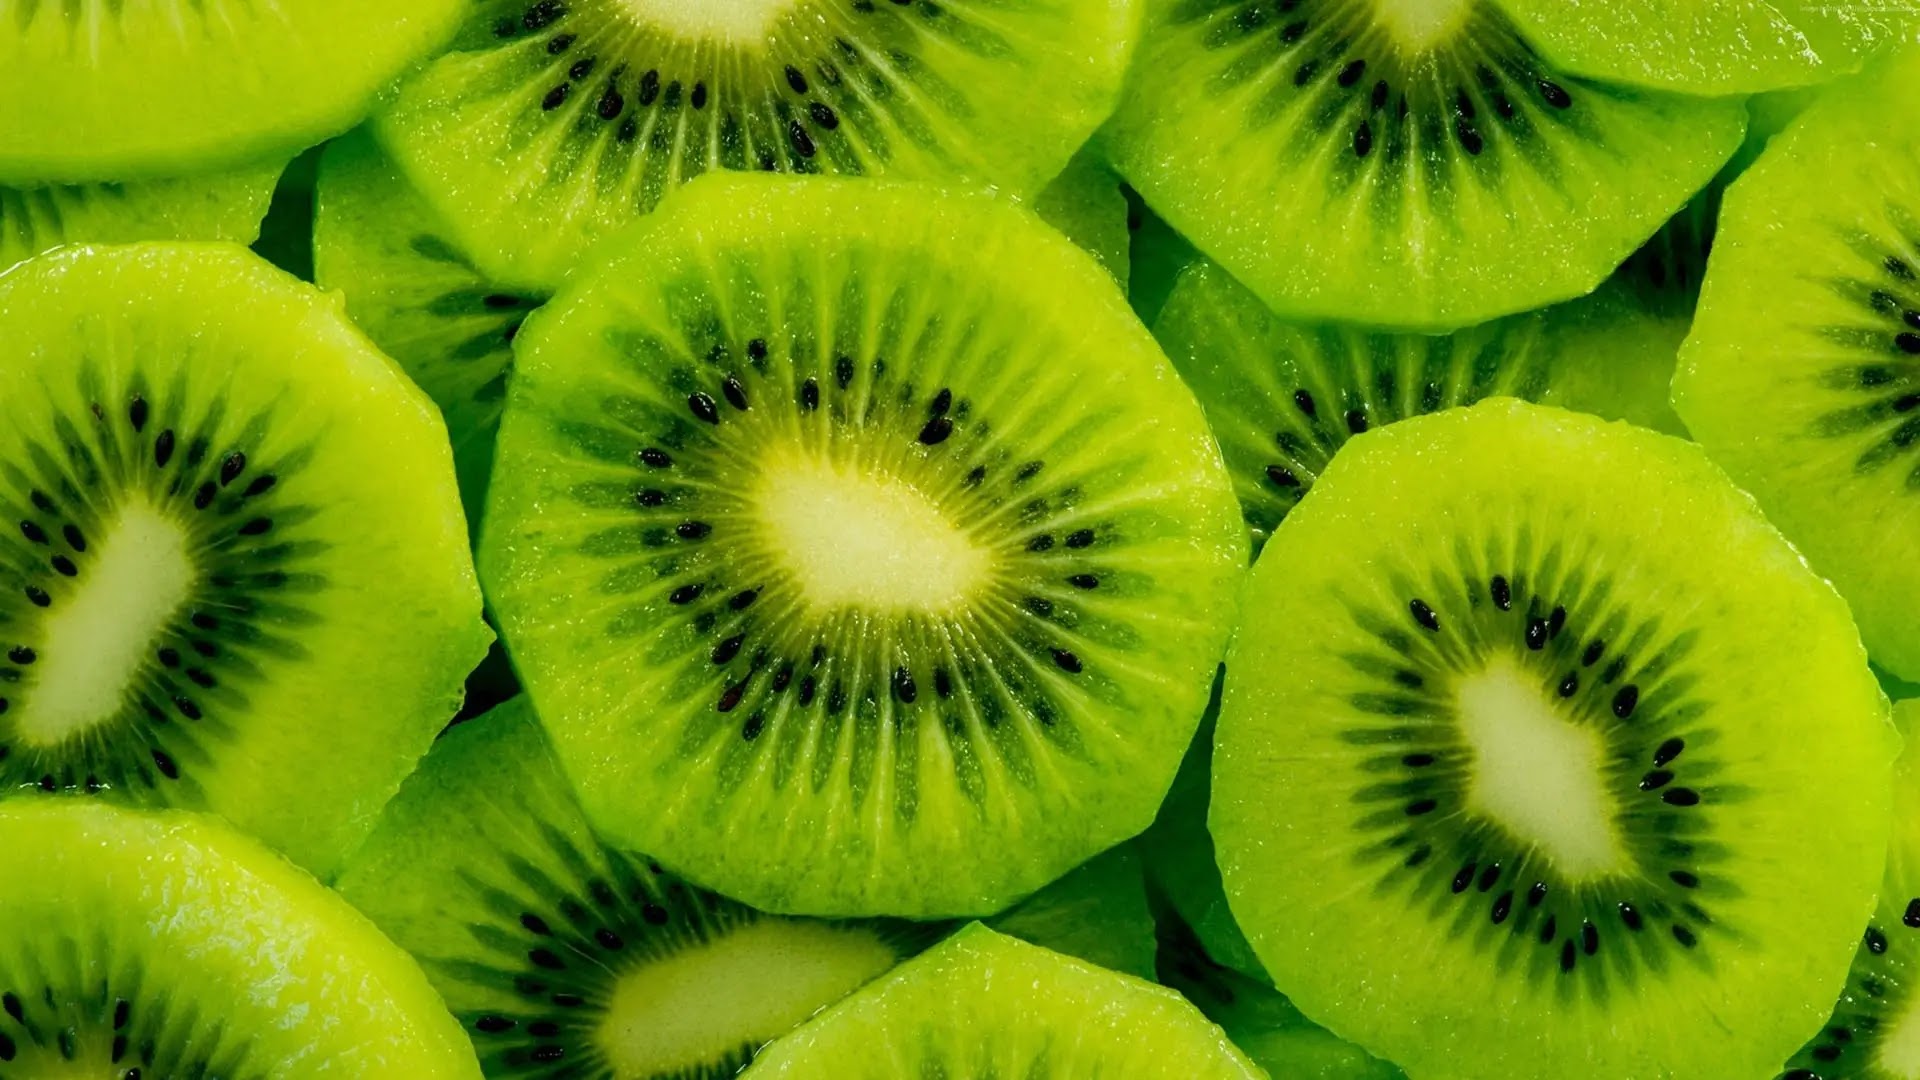 How Do Kiwis Live? How Can You Increase Your Wealth With It?